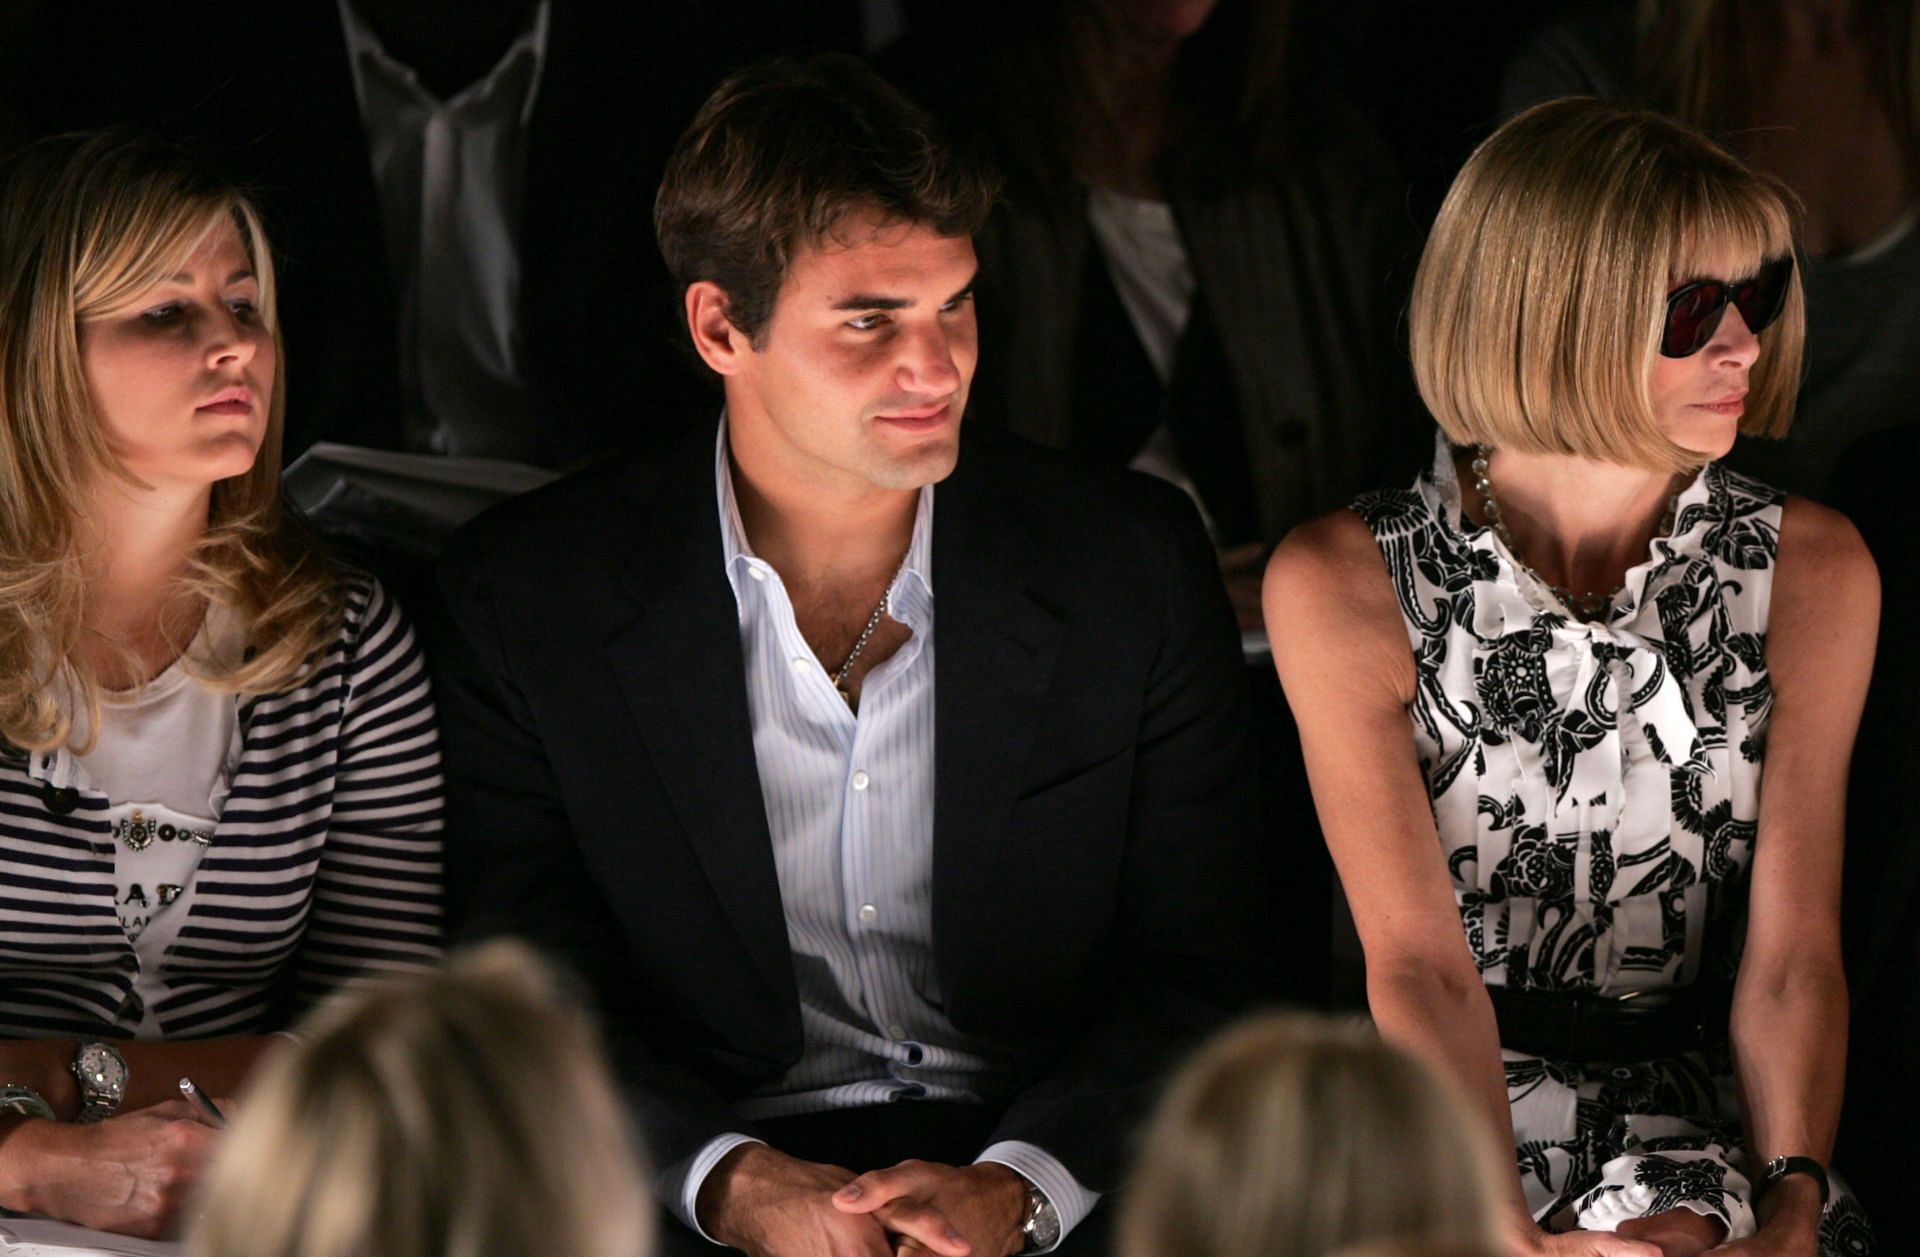 The Swiss with wife Mirka and Vogue editor-in-chief Anna Wintour at a fashion event in 2007